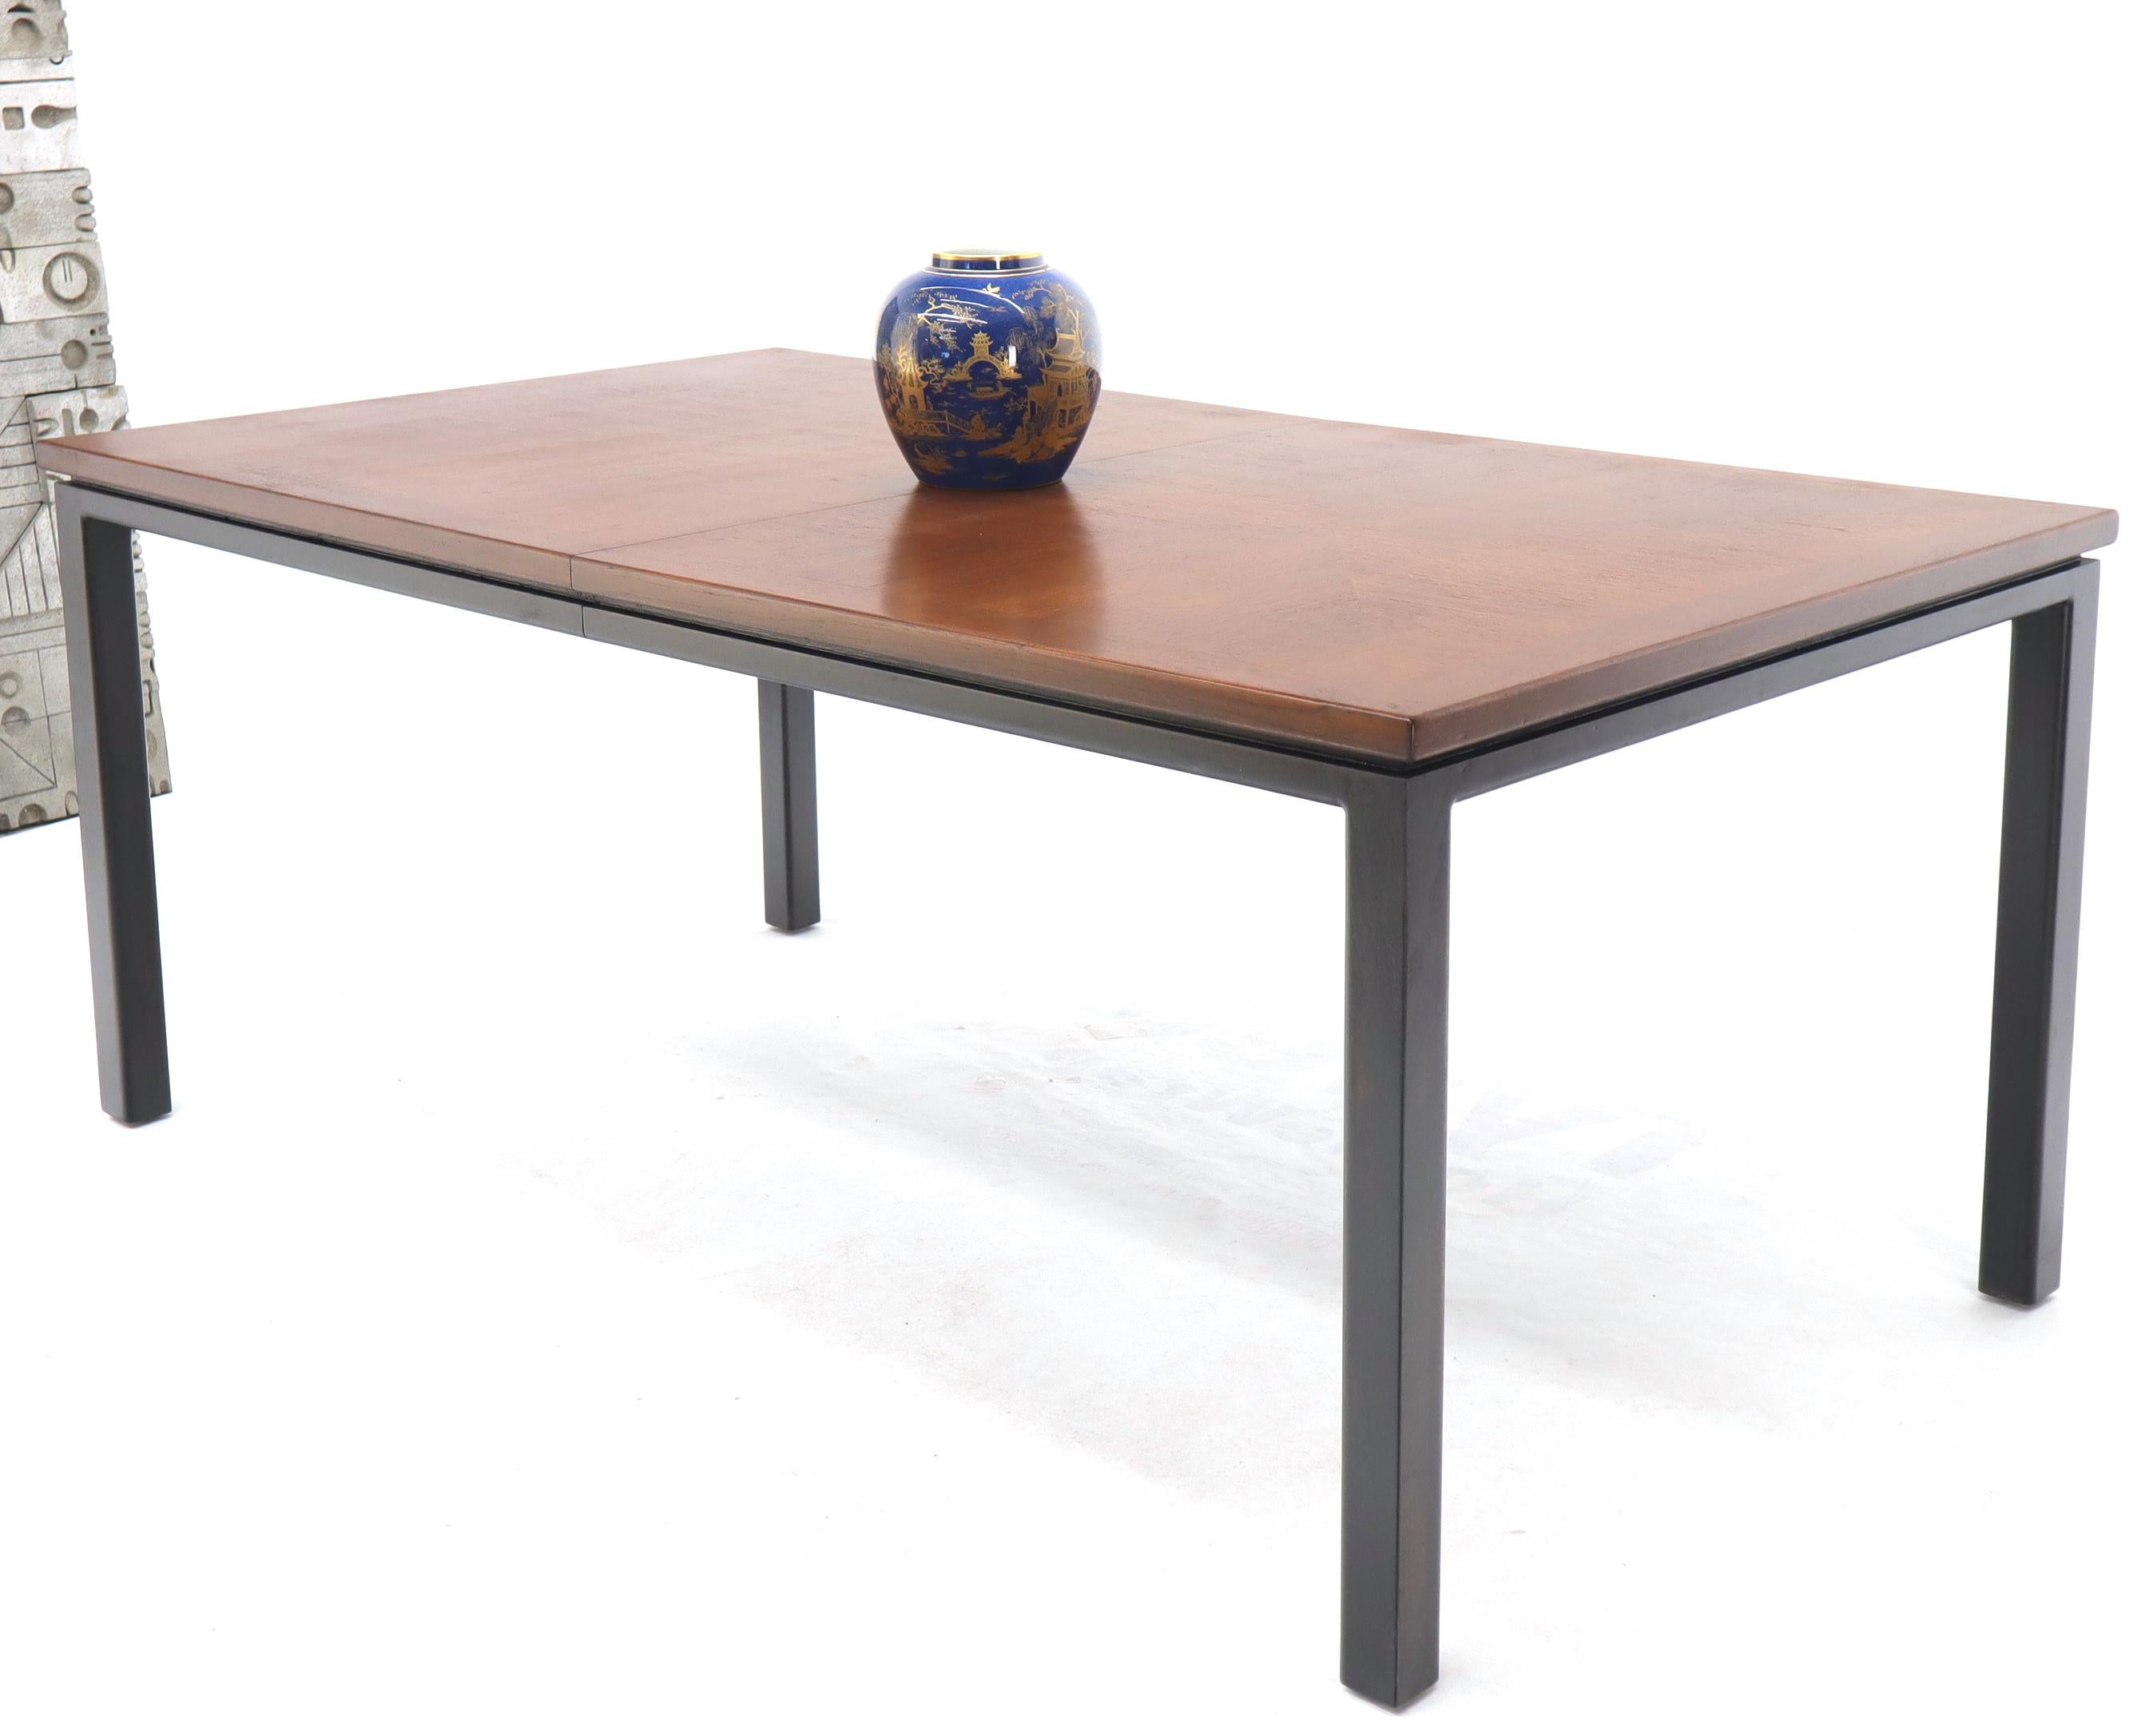 Mid-Century Modern dining table expandable to 124